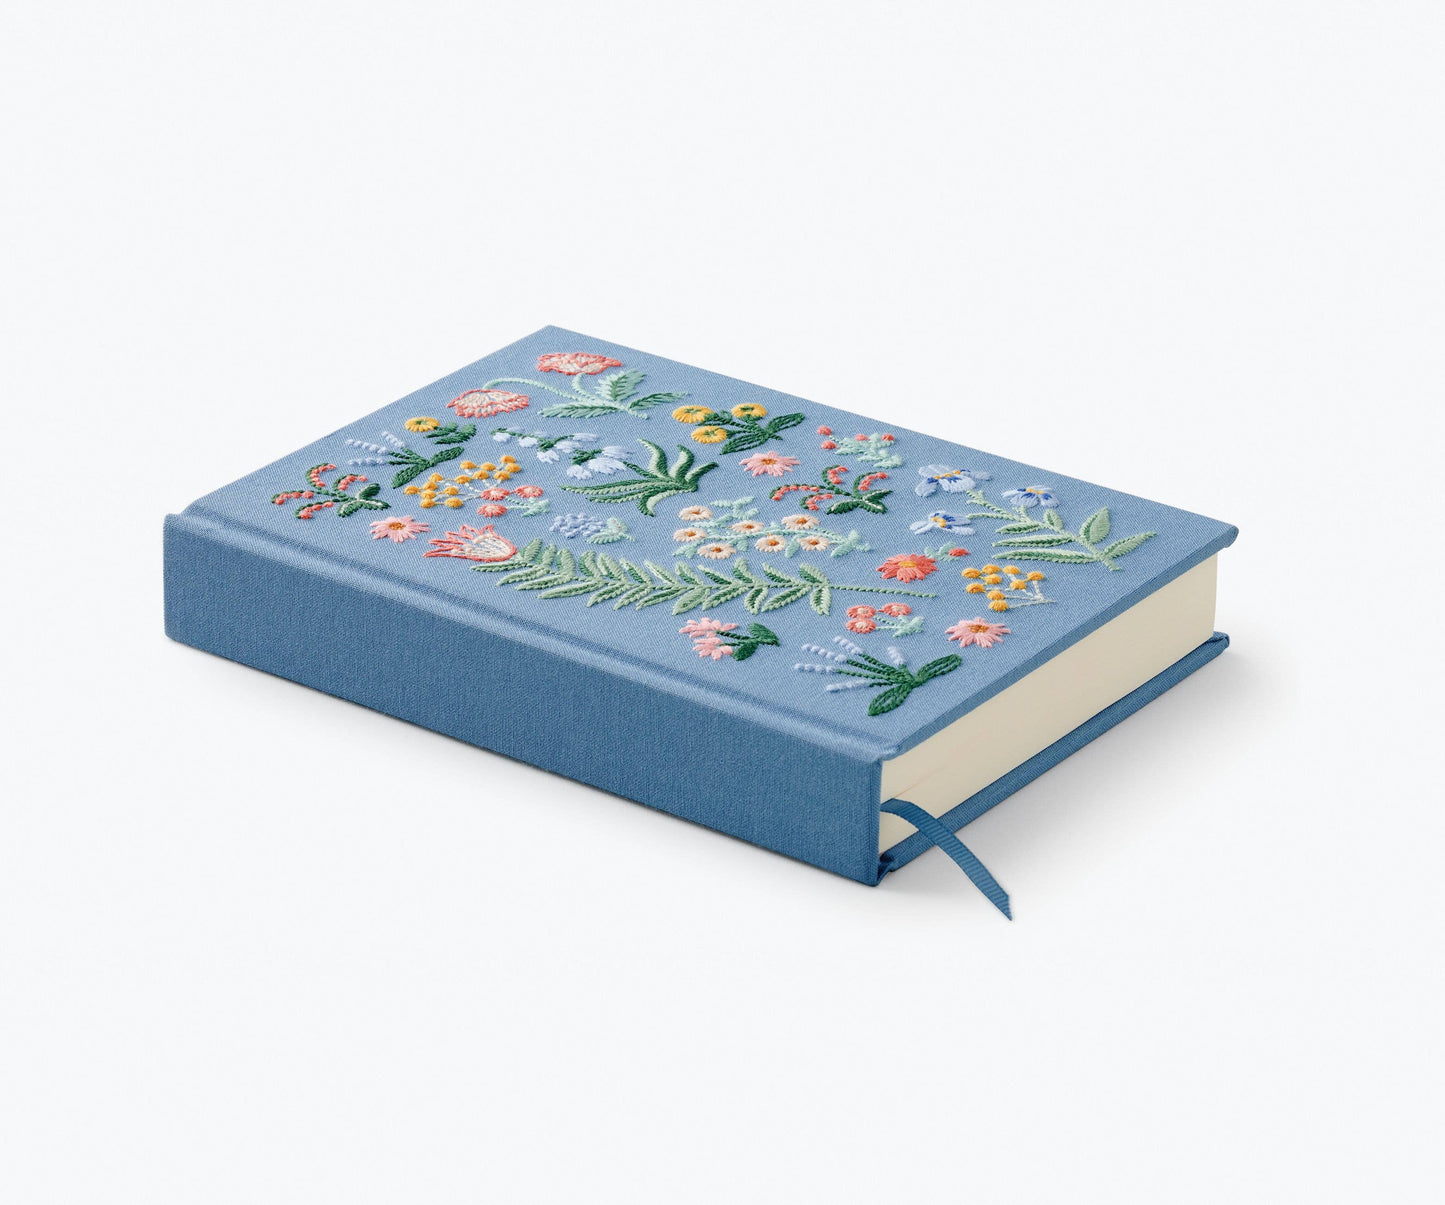 Large Menagerie Garden Embroidered Journal